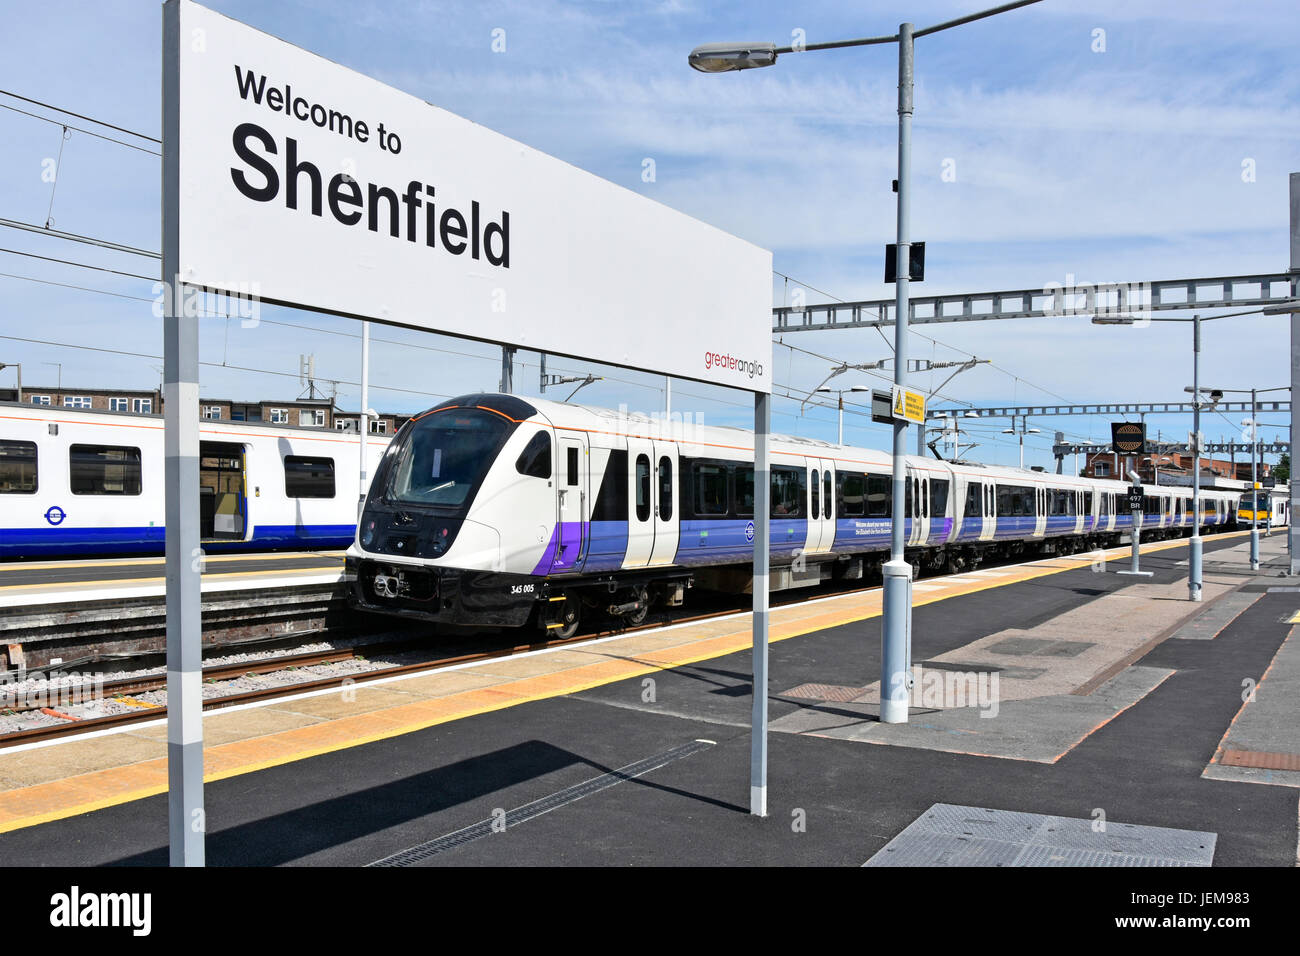 New tfl rail Crossrail class 345 train on Elizabeth Line on passenger all station service arrive Shenfield Essex from London Liverpool St 26/06/17 Stock Photo